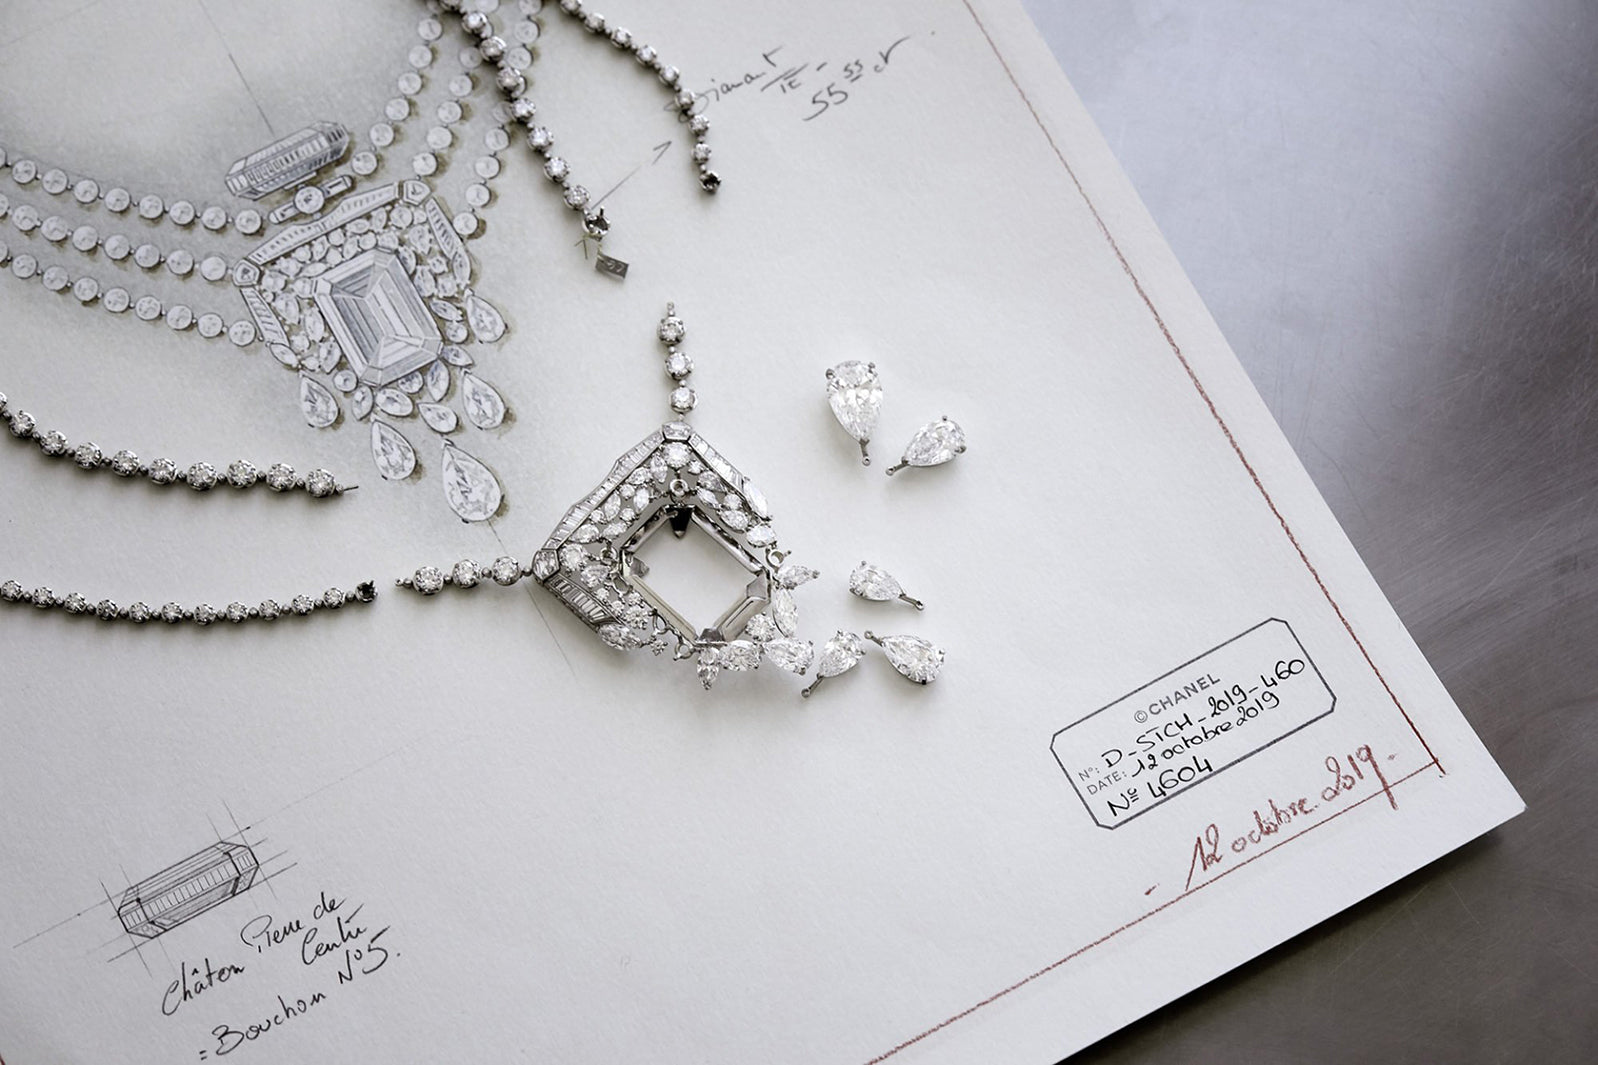 [Used Chanel Necklace] Chanel No5 Perfume Vintage Necklace